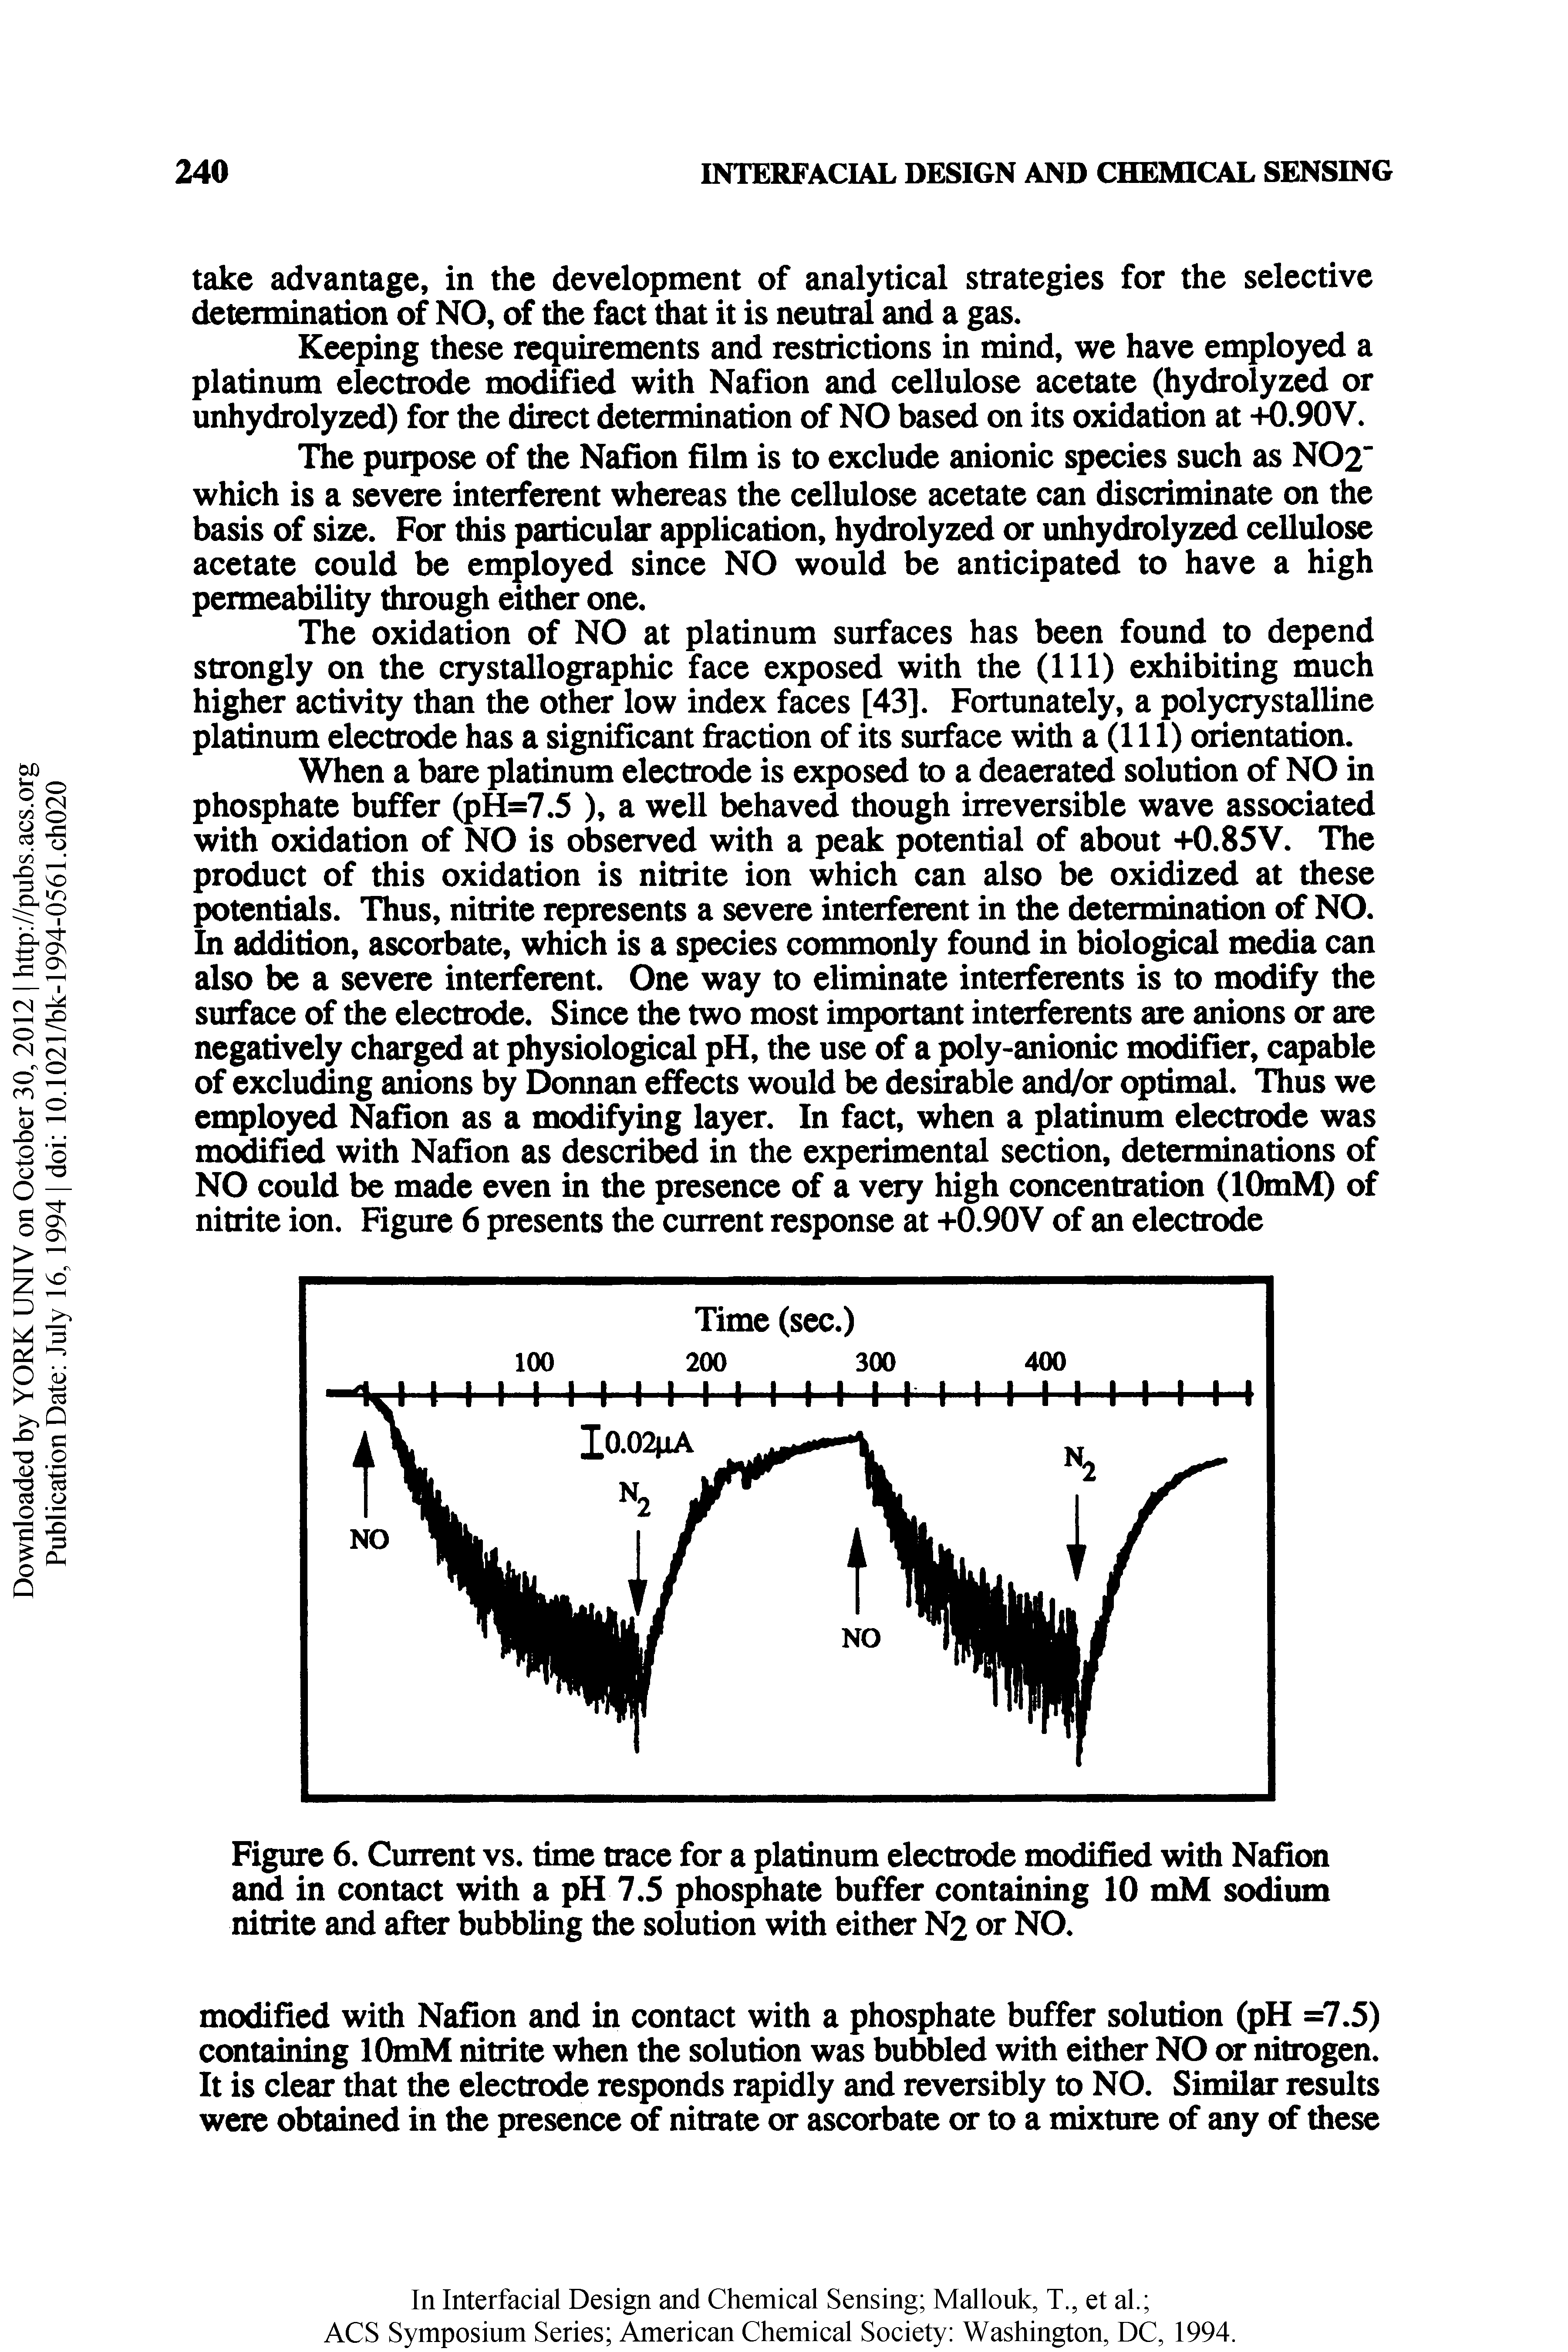 Figure 6. Current vs. time trace for a platinum electrode modified with Nafion and in contact with a pH 7.5 phosphate buffer containing 10 mM so um nitrite and after bubbling the solution with either N2 or NO.